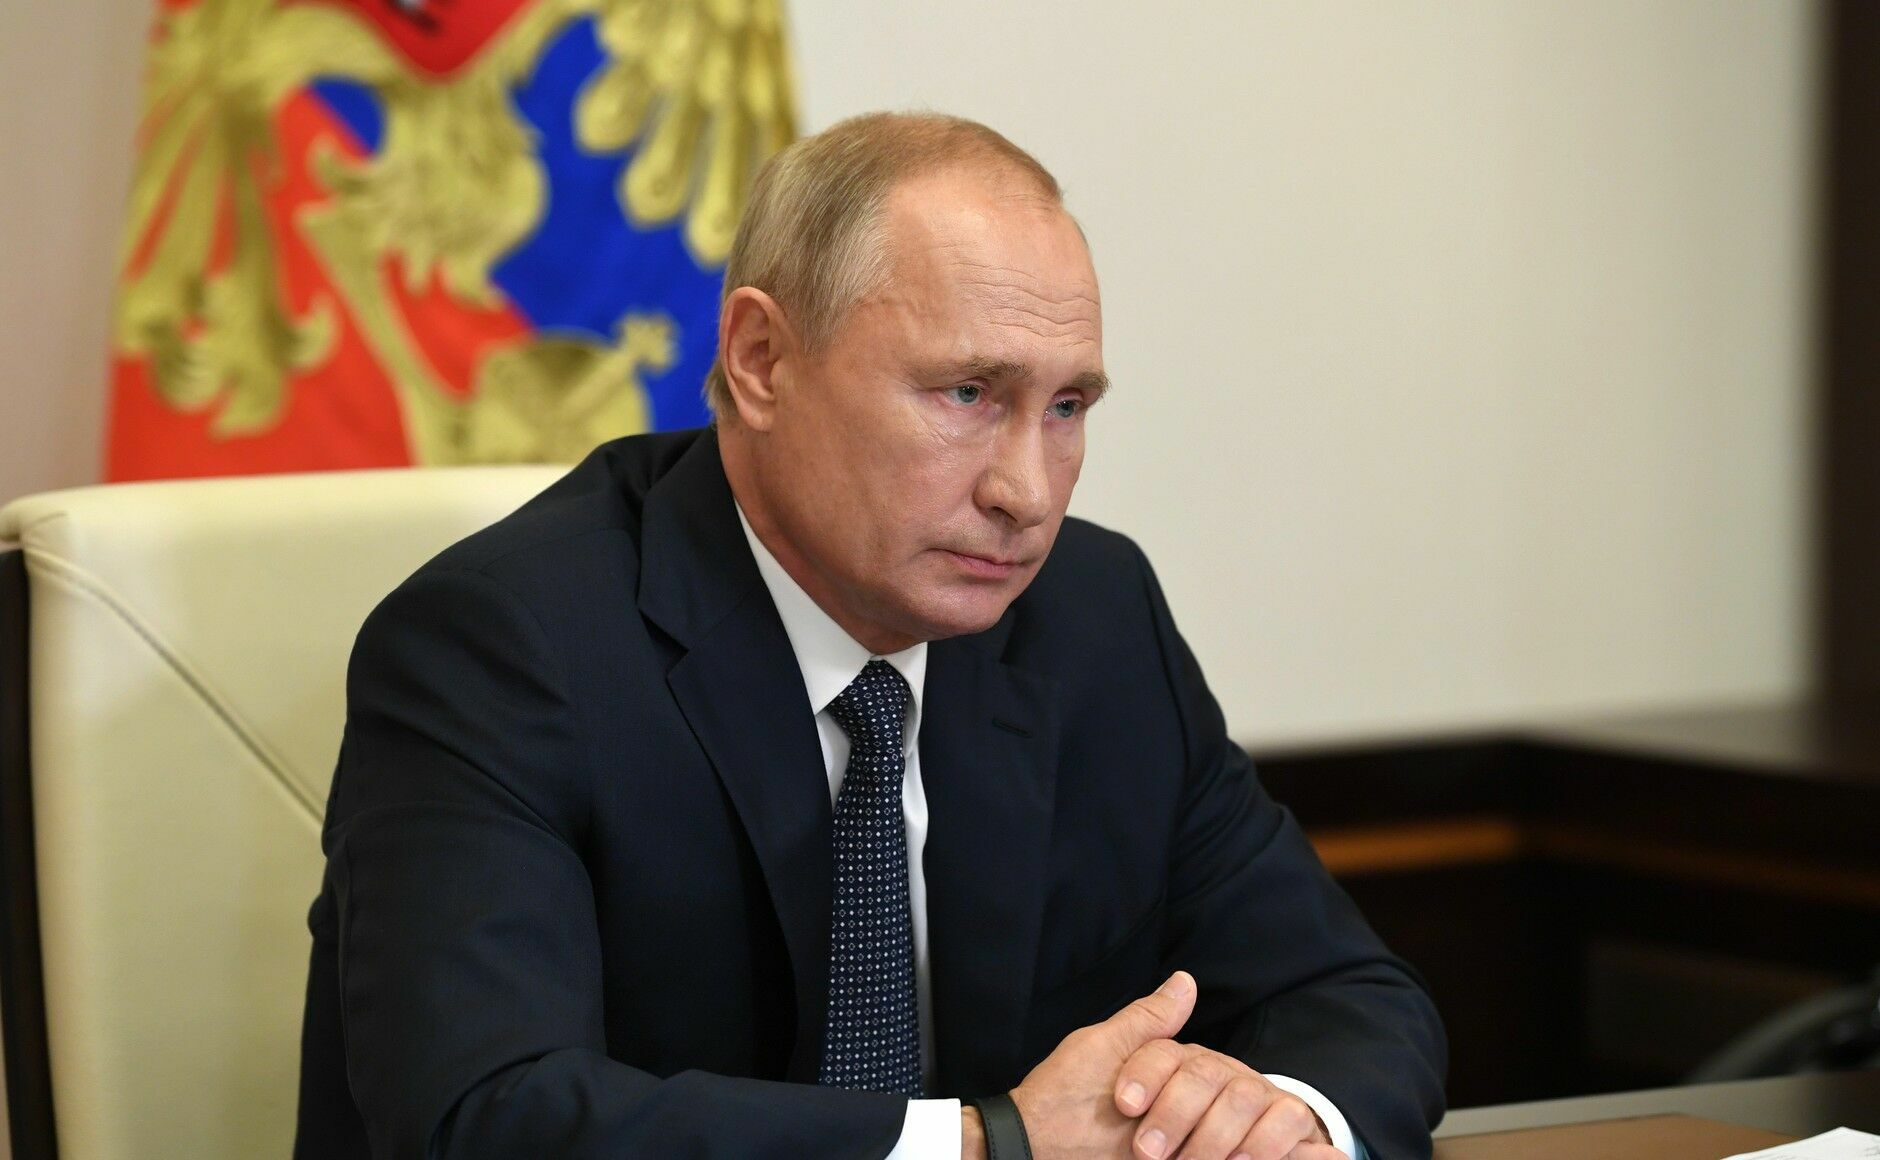 President Putin switched to a self-isolation regime